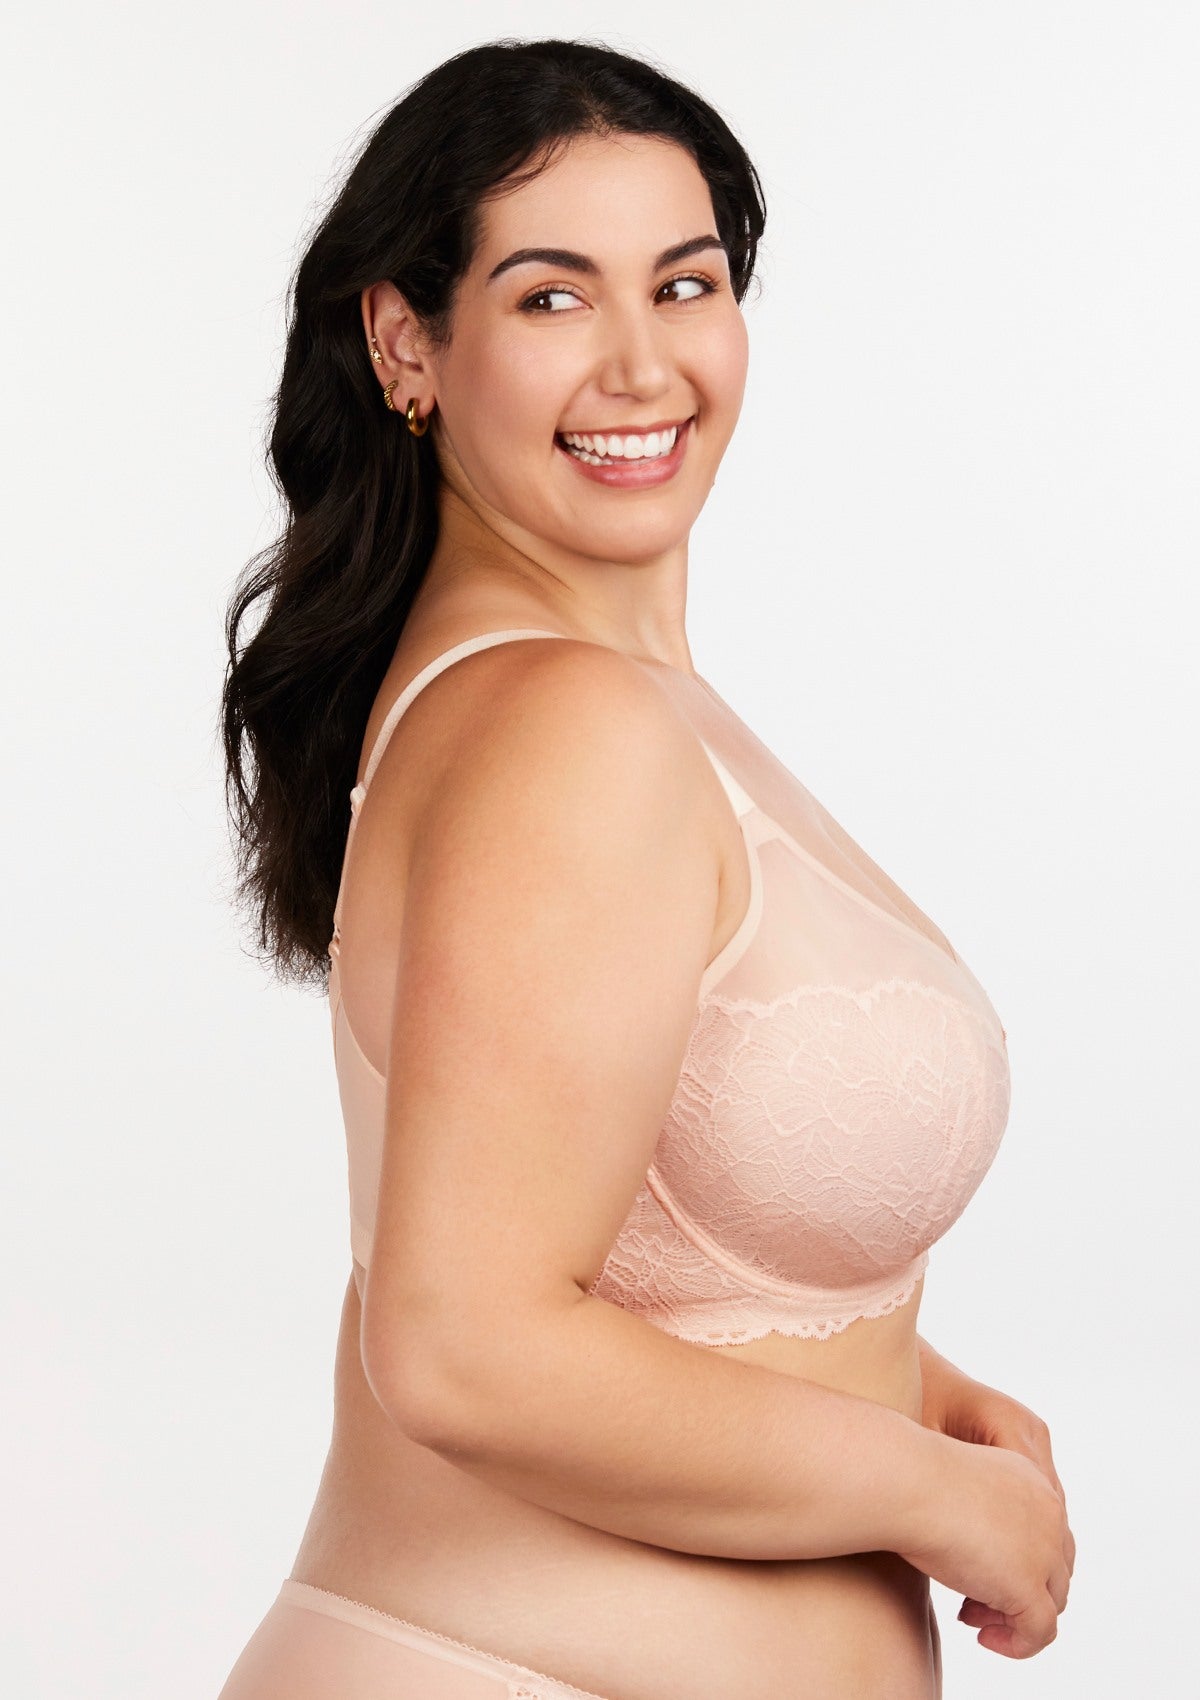 HSIA Blossom Sheer Lace Bra: Comfortable Underwire Bra For Big Busts - White / 40 / H